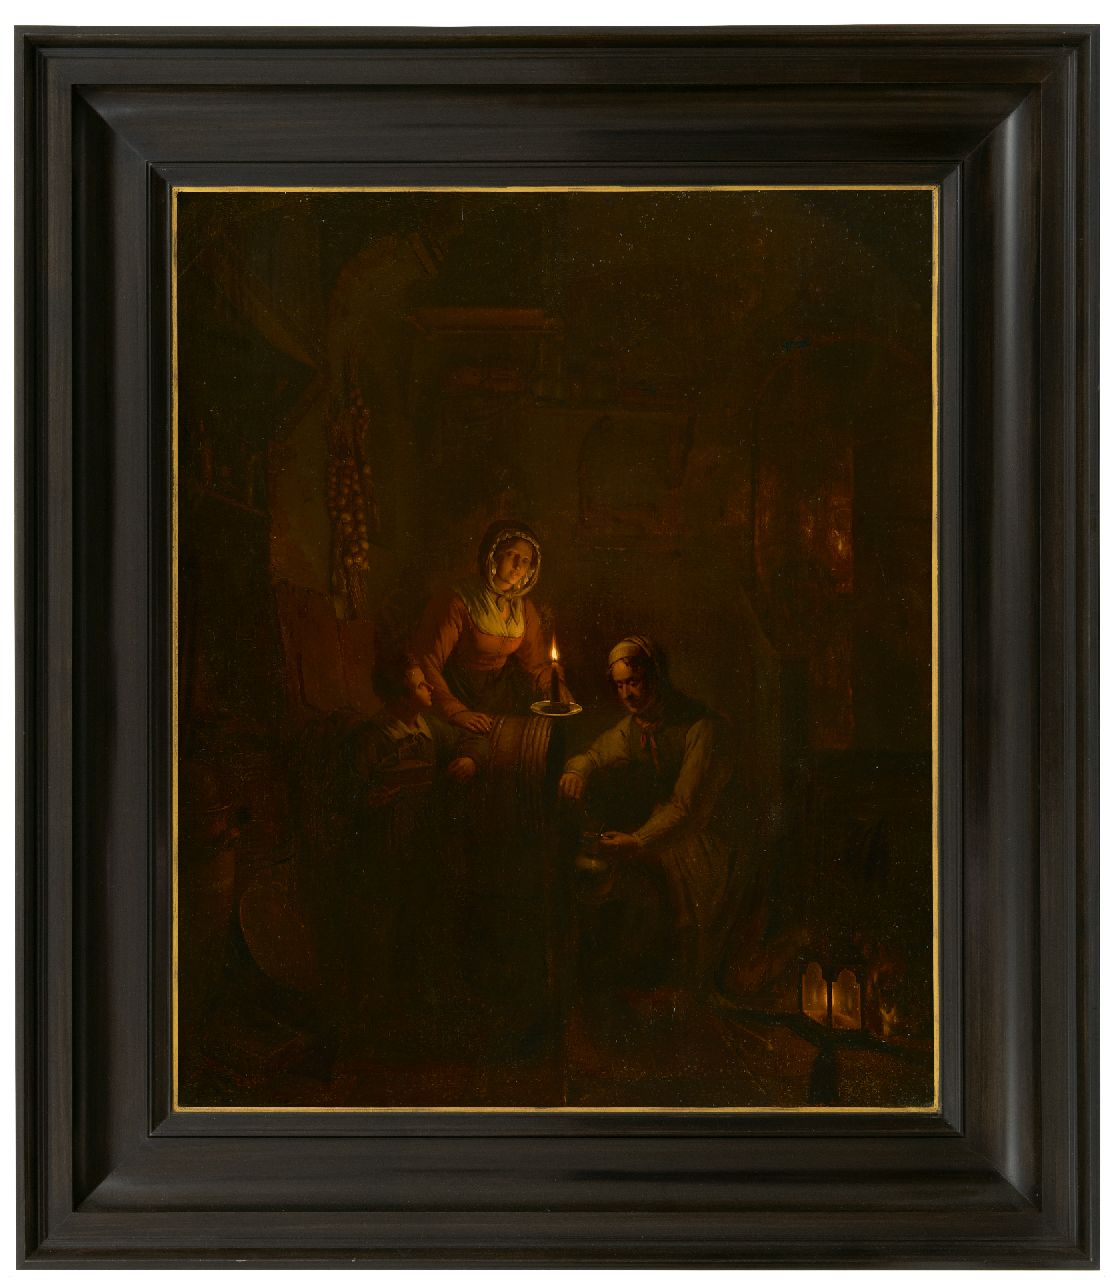 Haanen G.G.  | George Gillis Haanen | Paintings offered for sale | Tapping wine by candlelight, oil on panel 58.1 x 47.7 cm, signed l.r. and dated 1837